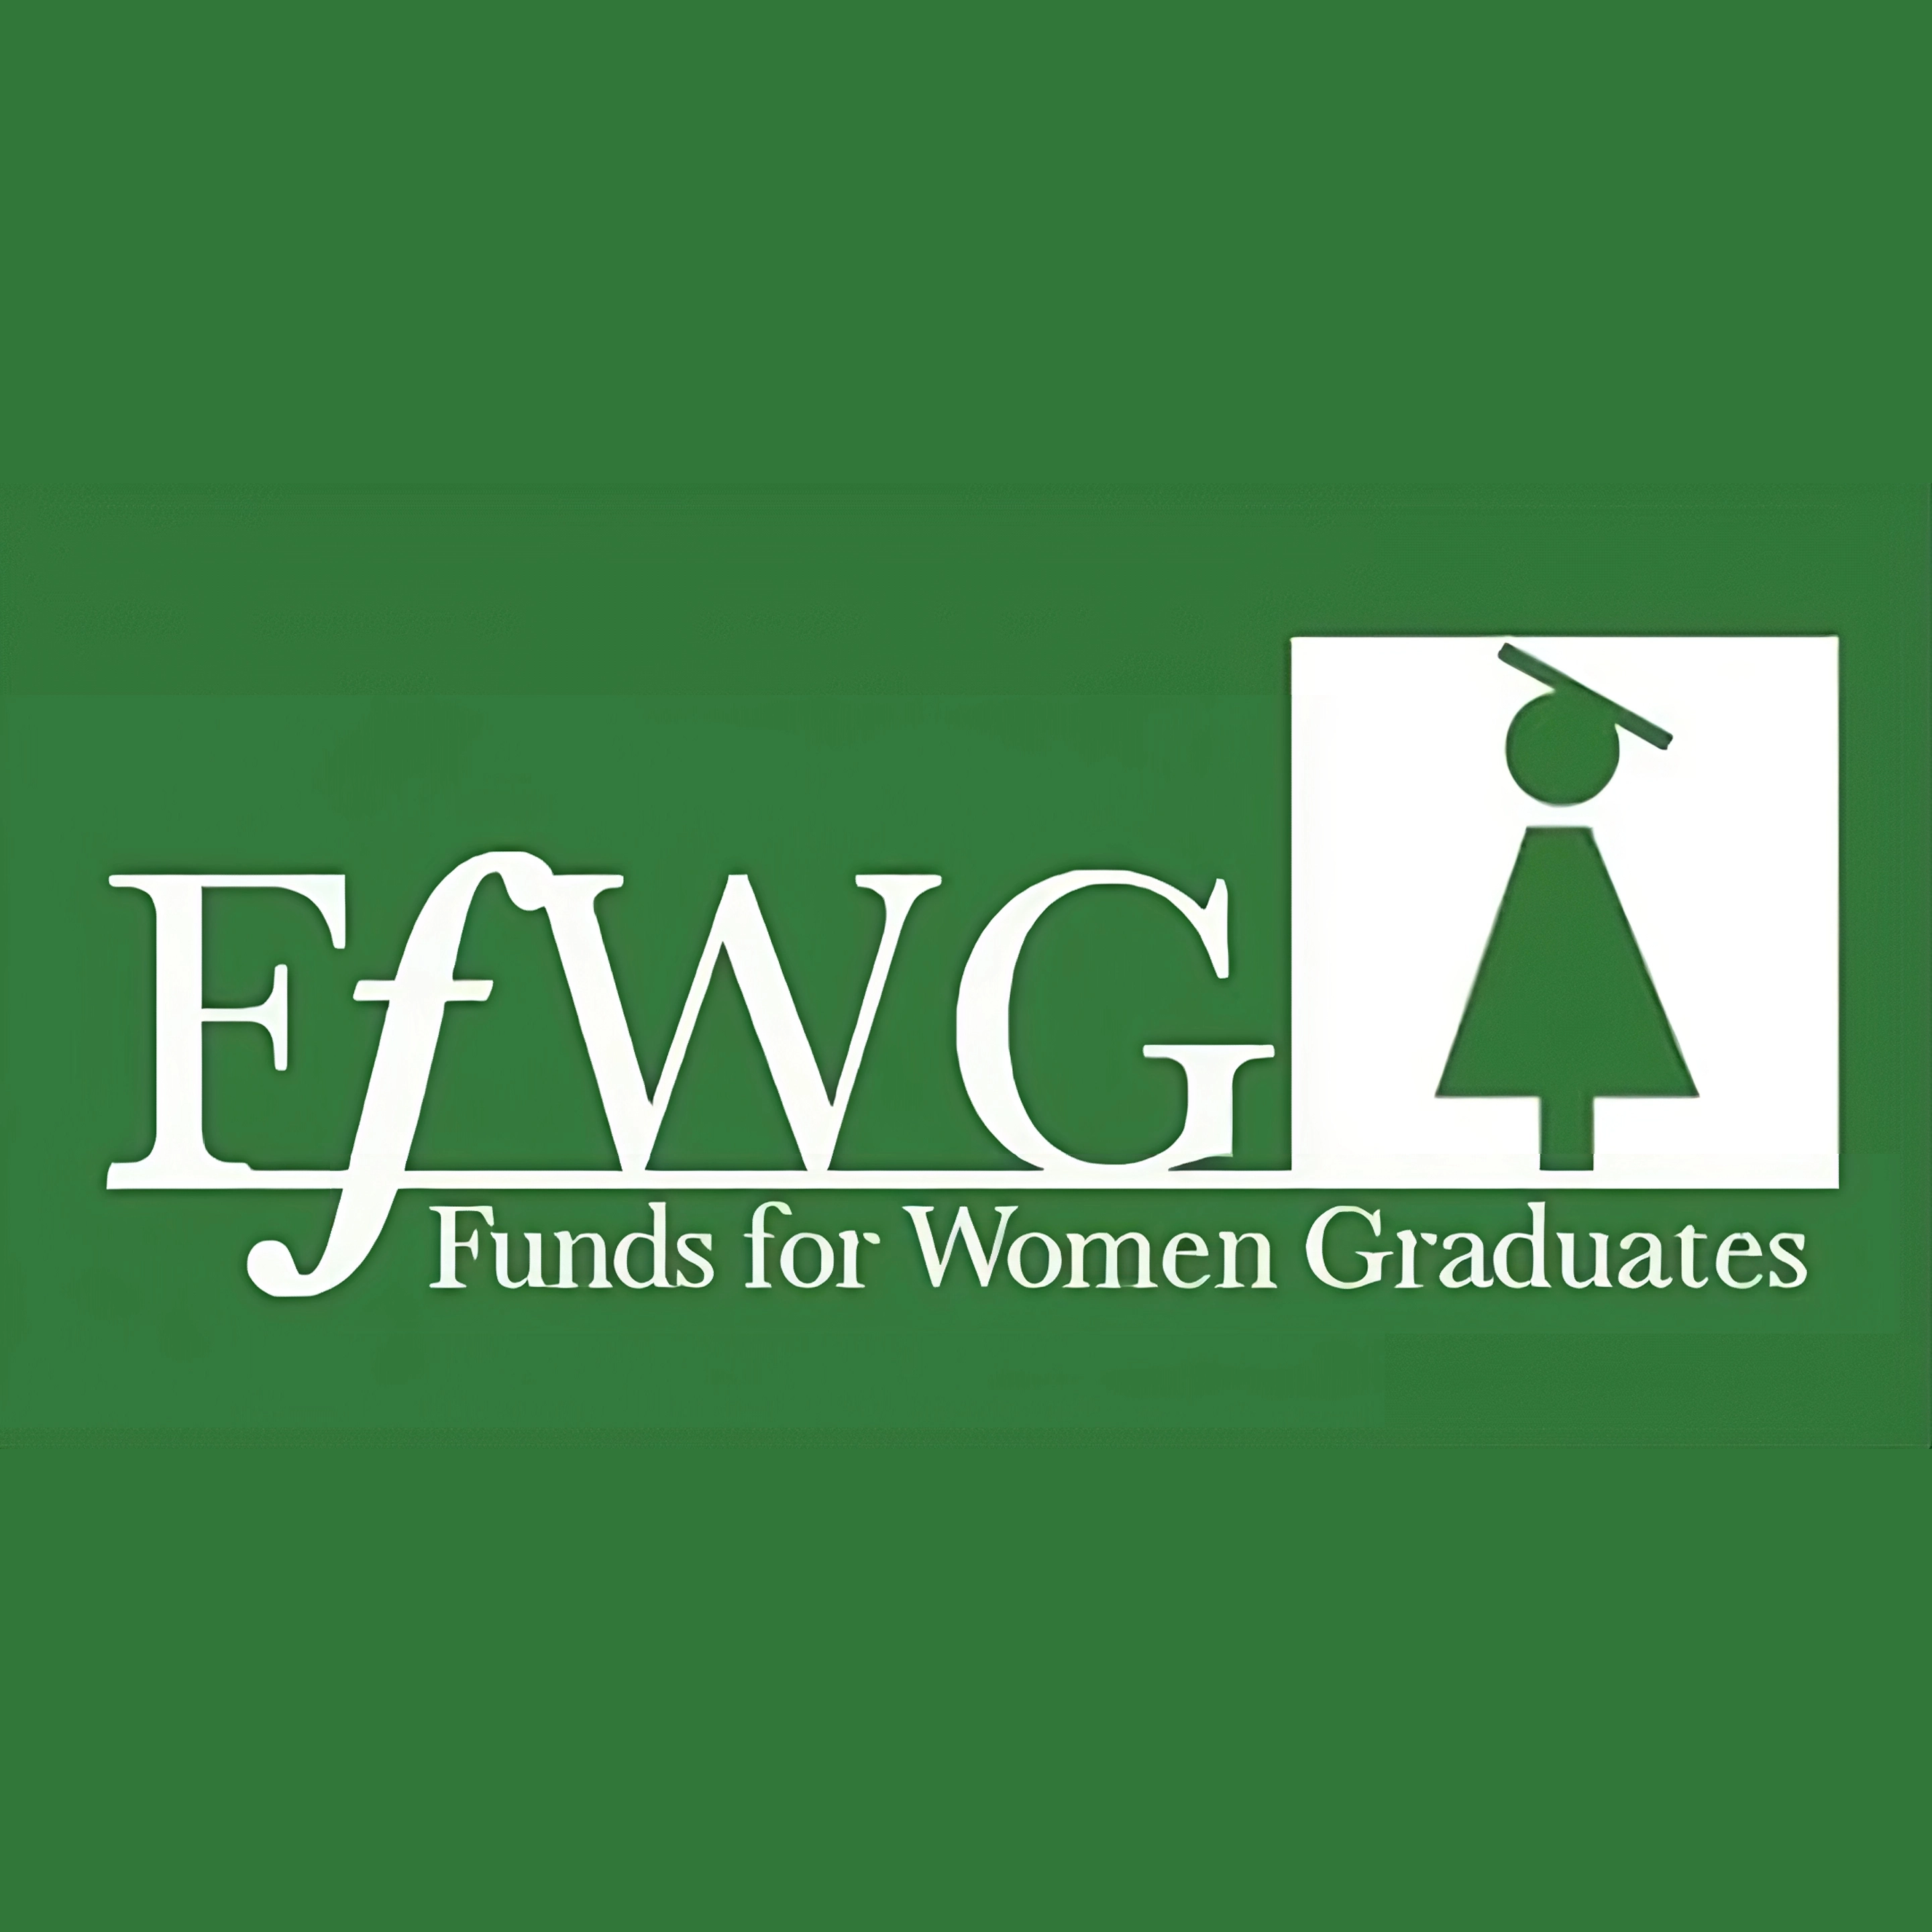 Funds for Women Graduates (FFWG)